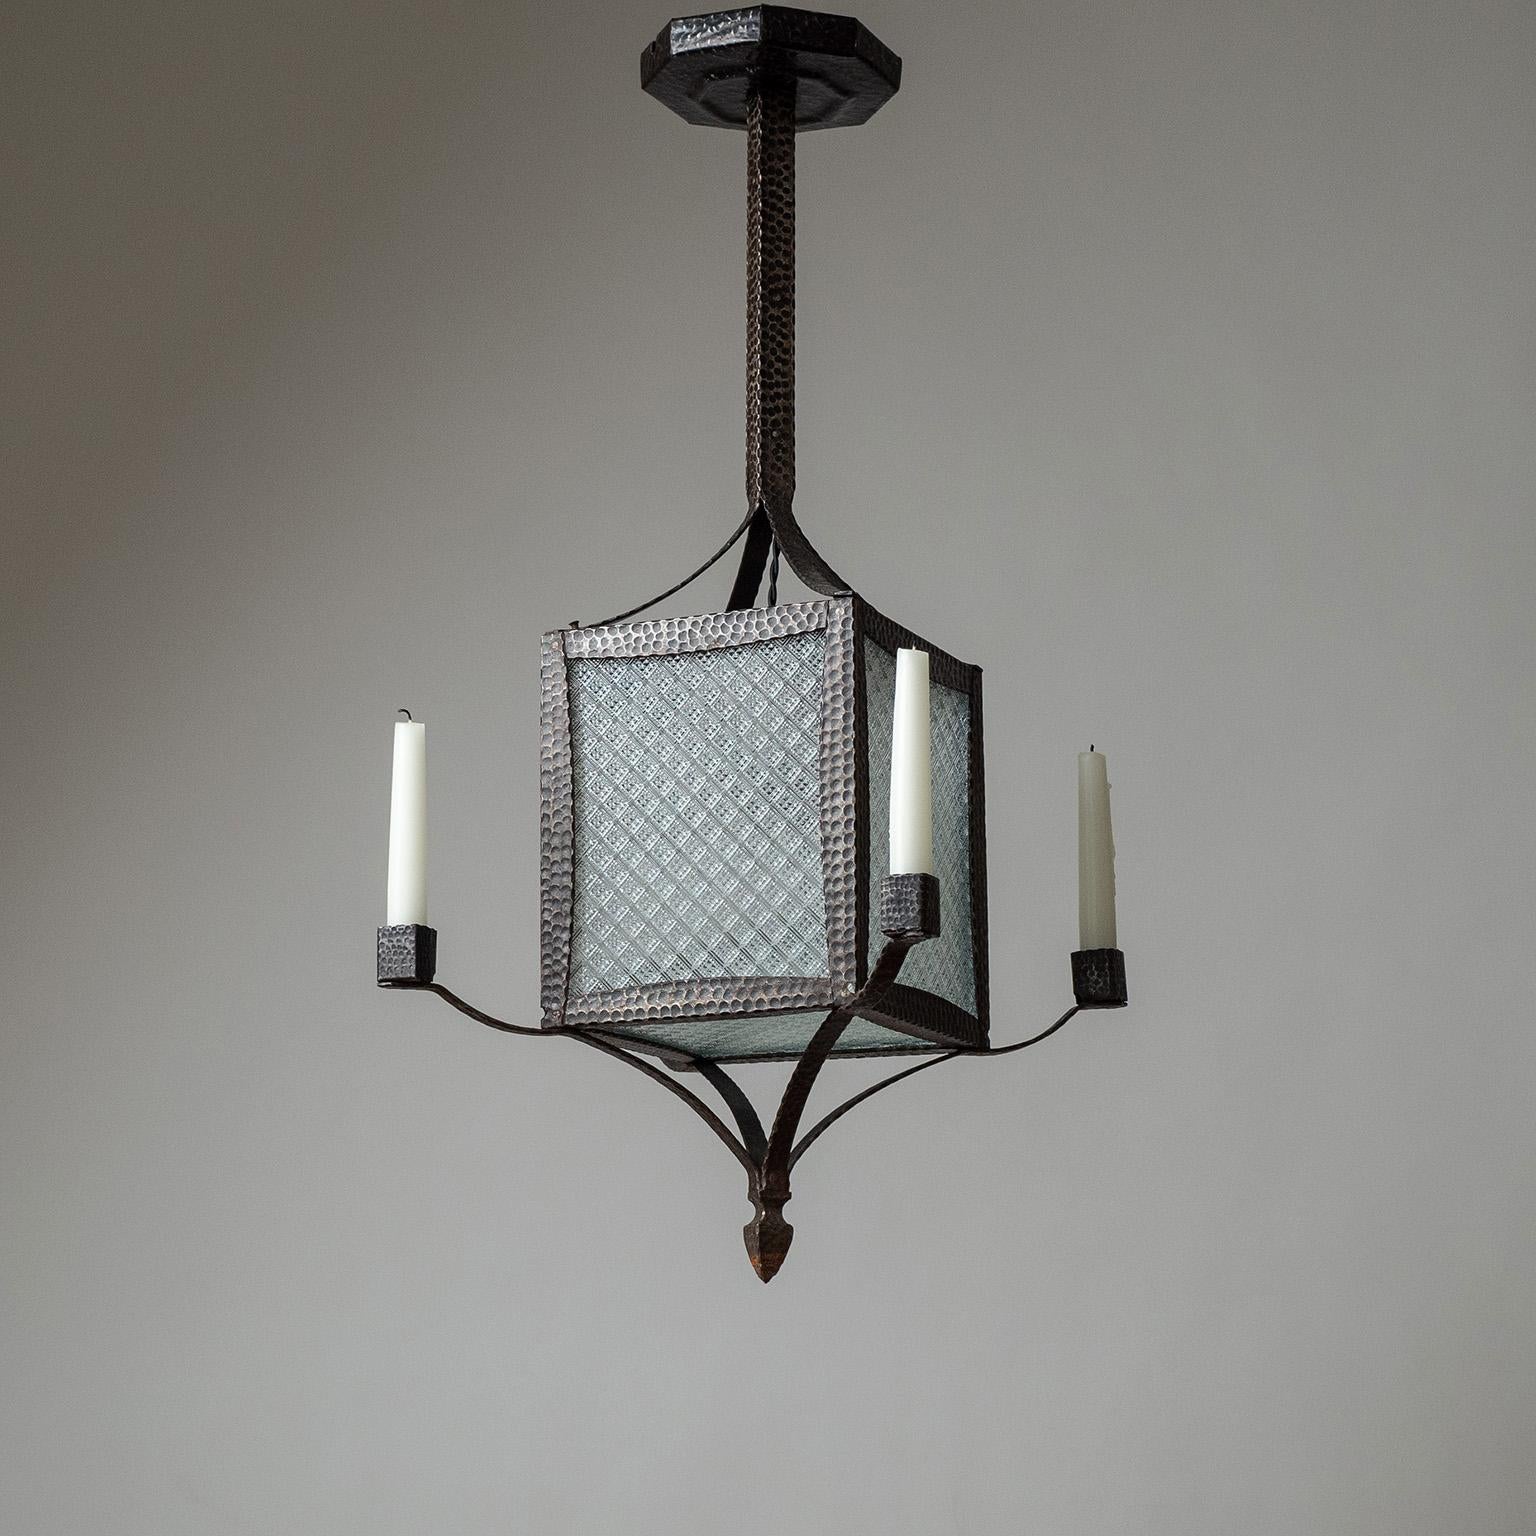 Fine Swedish forged iron and textured glass lantern from the 1920-1930s. Central, square-shaped body with geometric-textured glass panes and an original brass and ceramic E27 socket with new wiring. On the corners are four arms with rectangular